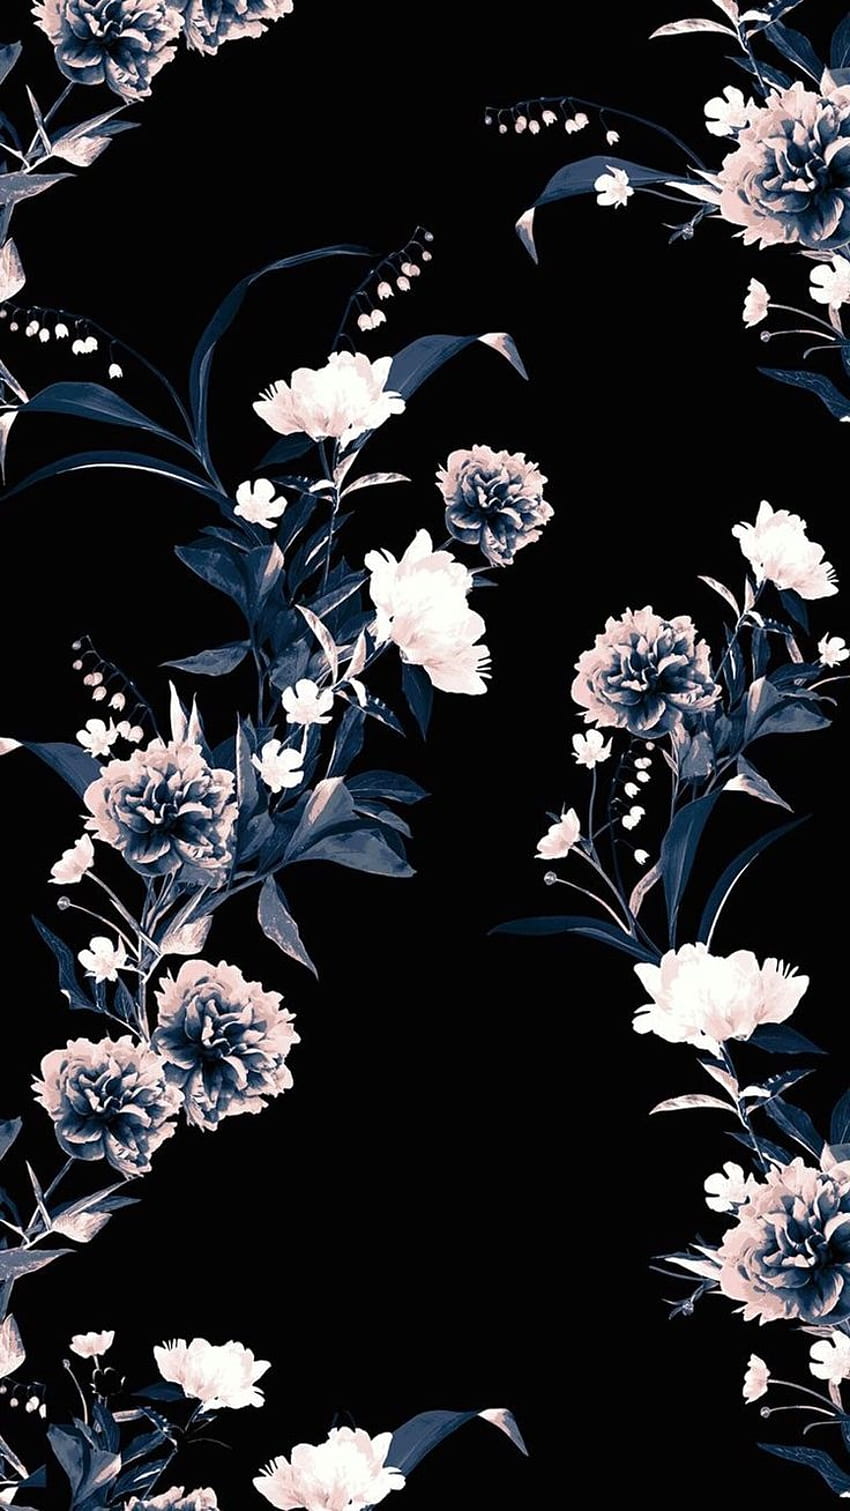 14 Anime Flower Wallpapers for iPhone and Android by Patricia Stout